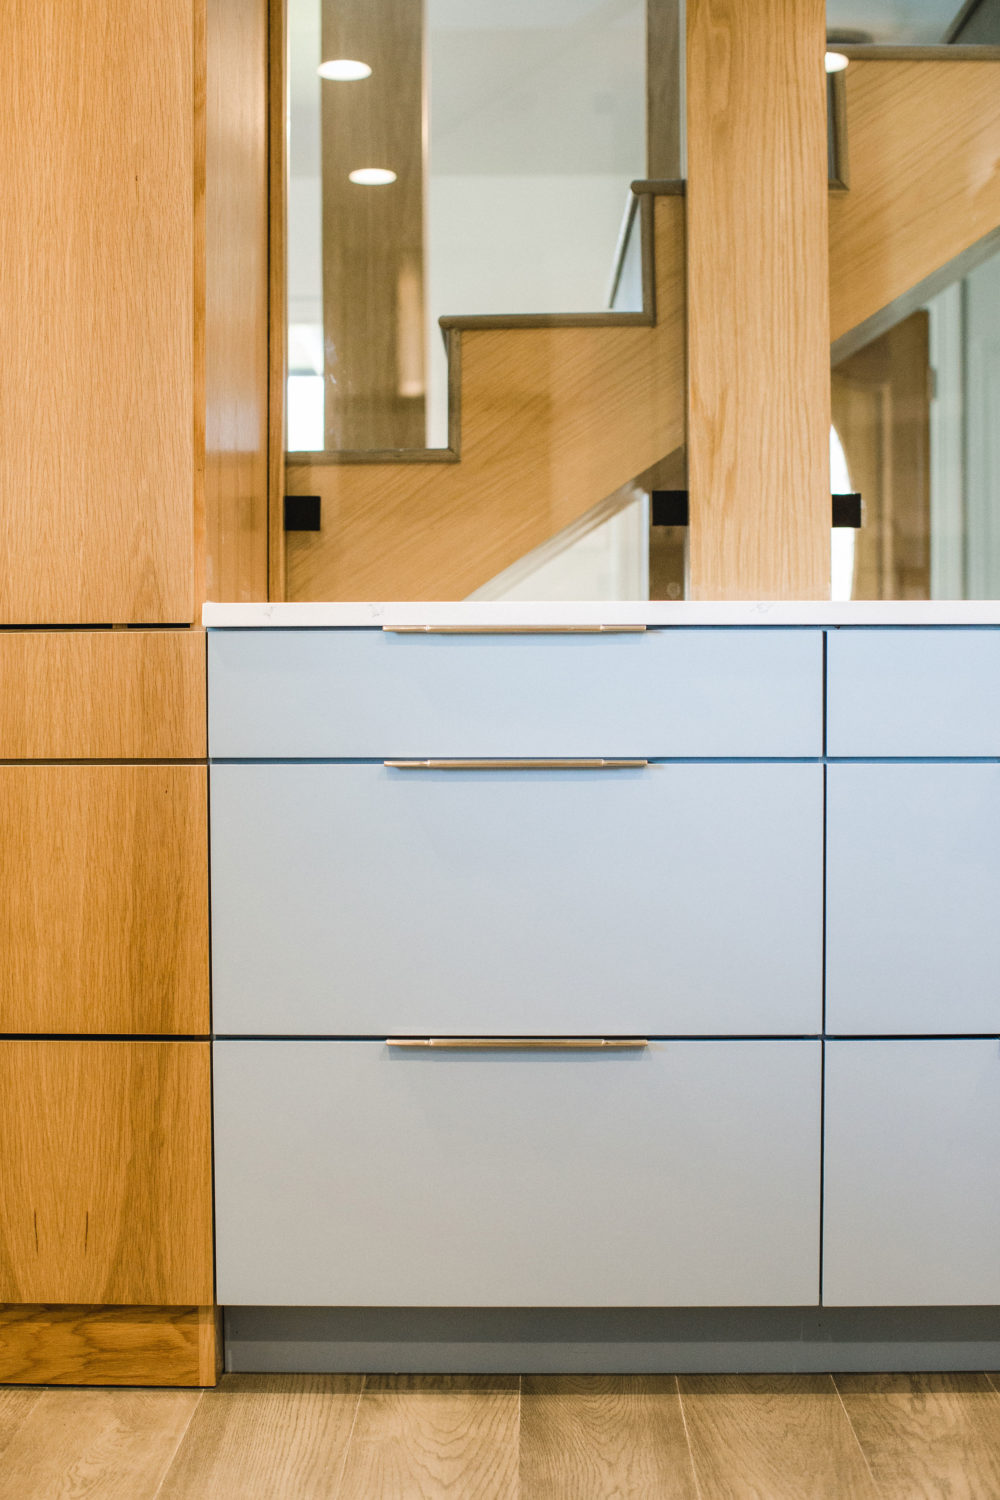 Hide Your Appliances with Custom Paneling & Garage Cabinets